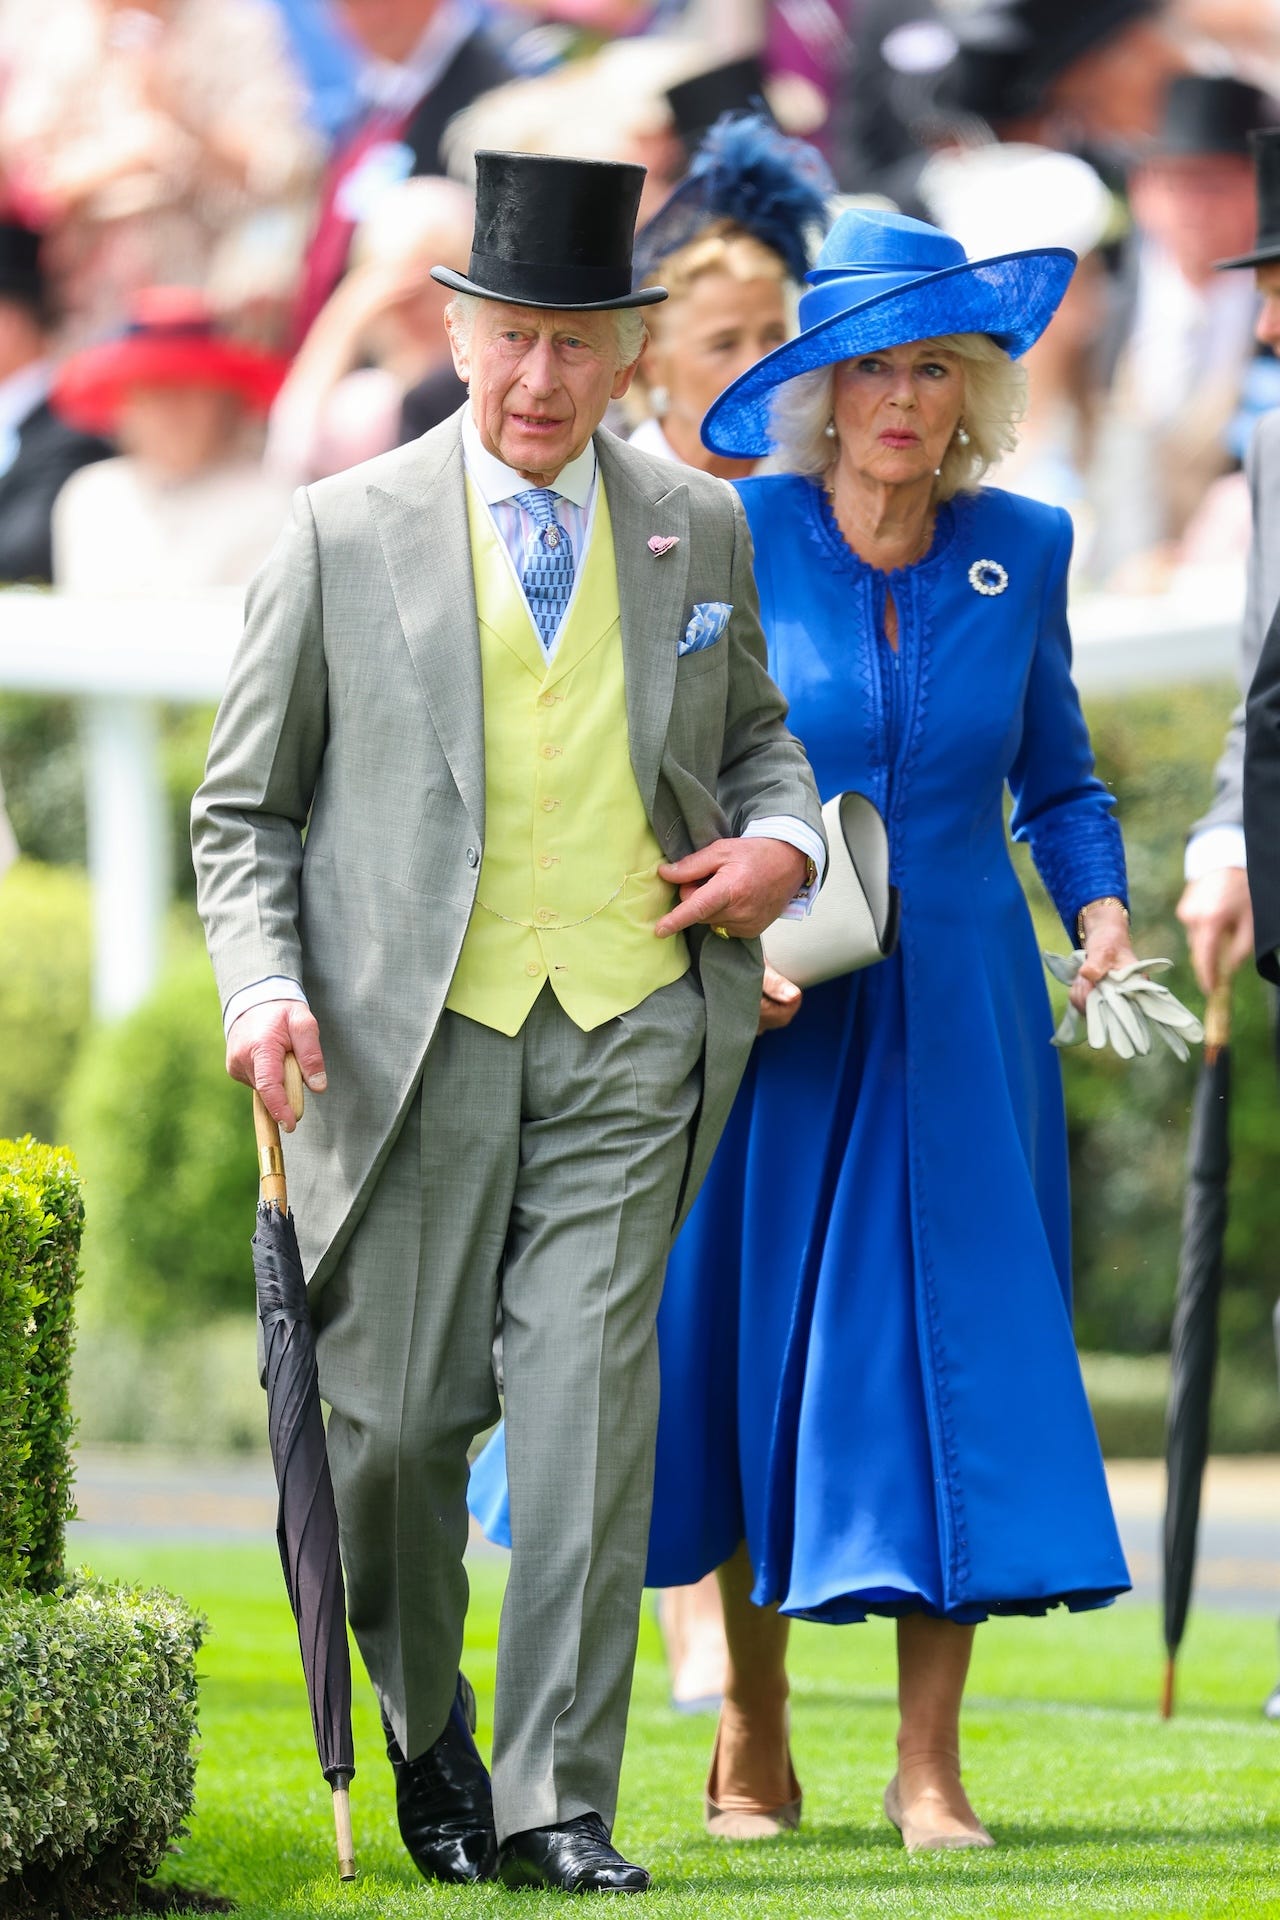 <p>Charles, 75, wore a light-gray morning suit layered over a pale-yellow waistcoat and a striped collared shirt topped off with a black top hat. The king completed his look with a blue tie and pocket square, subtly coordinating with his date, Camilla, 76.</p><p>For her Royal Ascot day one ensemble, Camilla opted for a royal-blue coat and dress by Fiona Clare, accessorized with a brooch, a white clutch, gloves, and, of course, an eye-catching blue summer hat designed by veteran British milliner and go-to hat designer for the royals, Philip Treacy.</p>